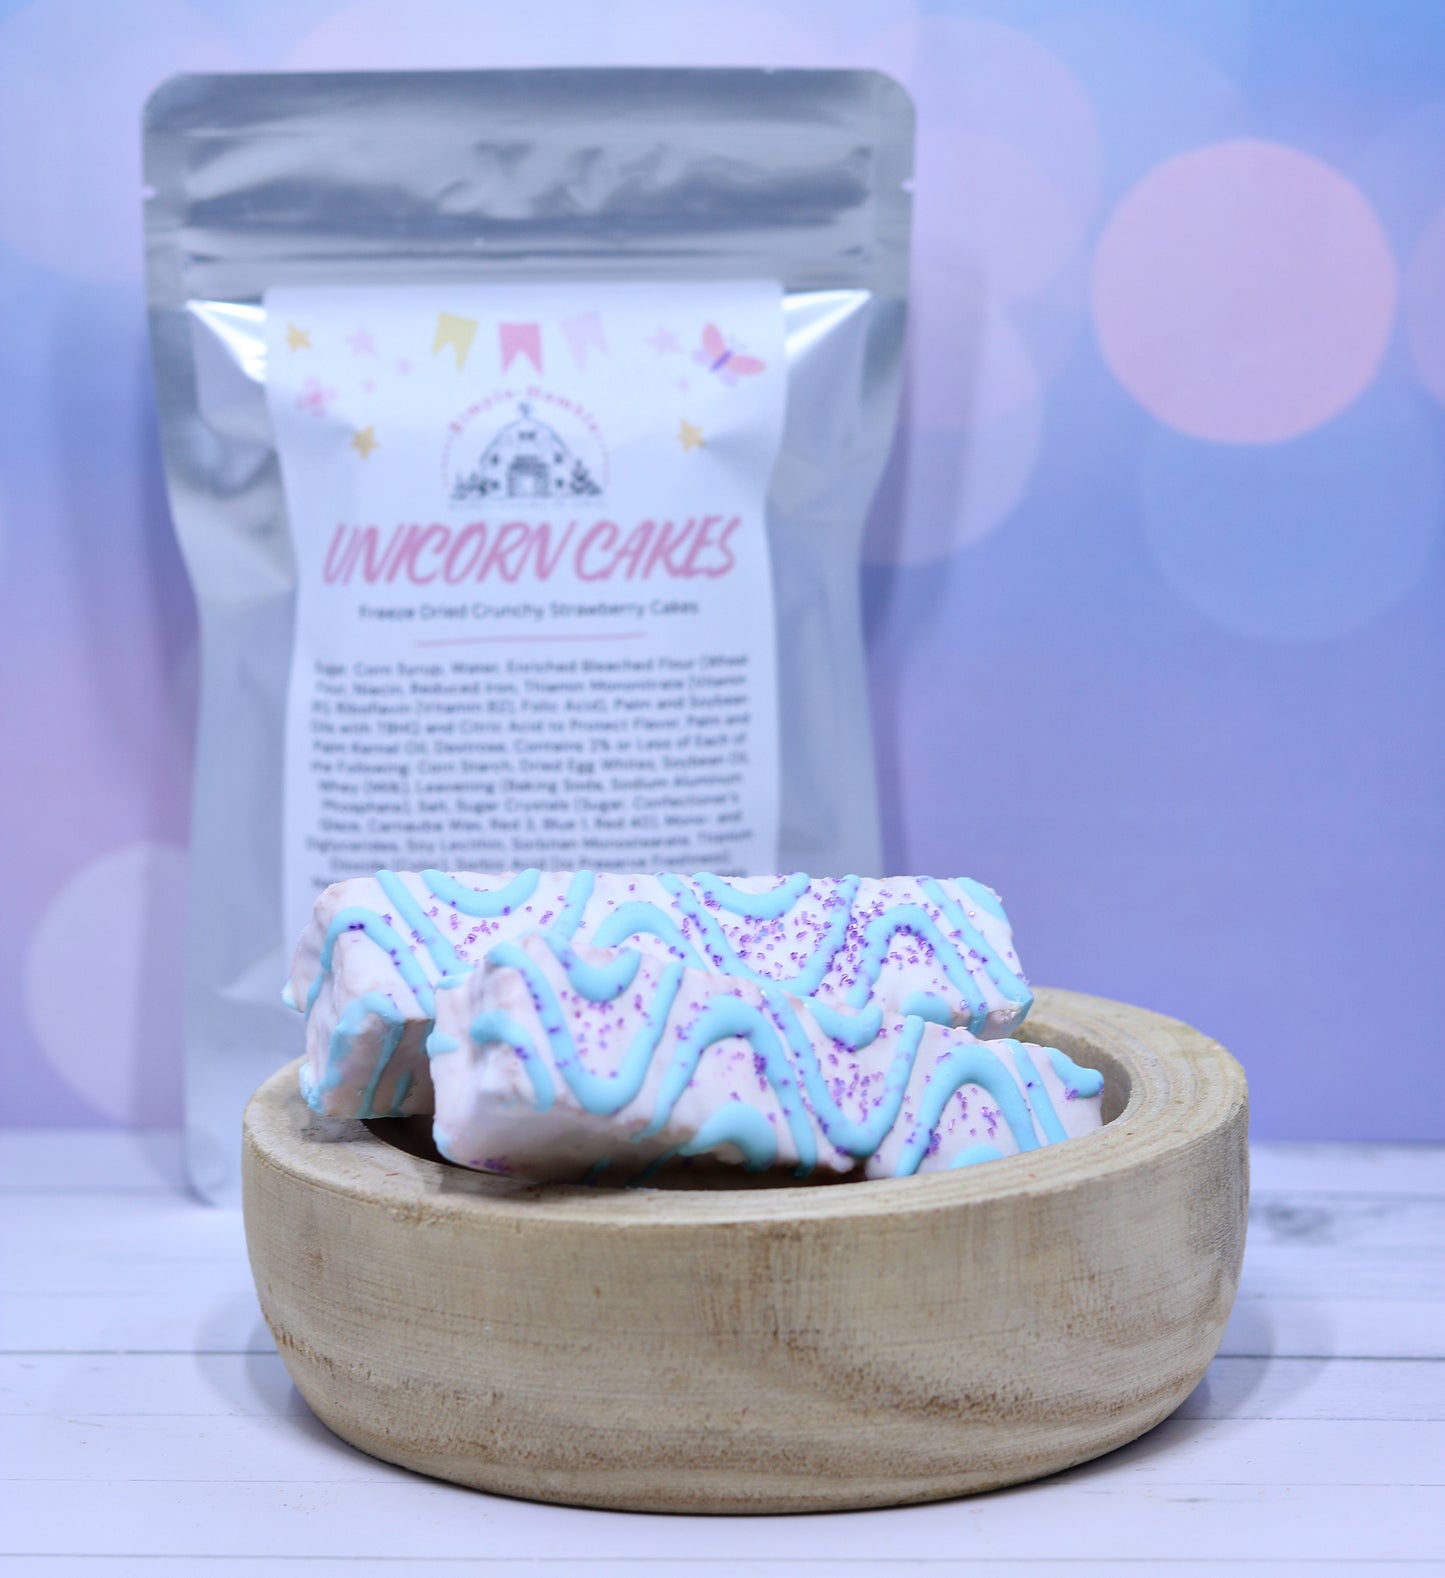 Freeze Dried Unicorn Cakes Strawberry Flavored